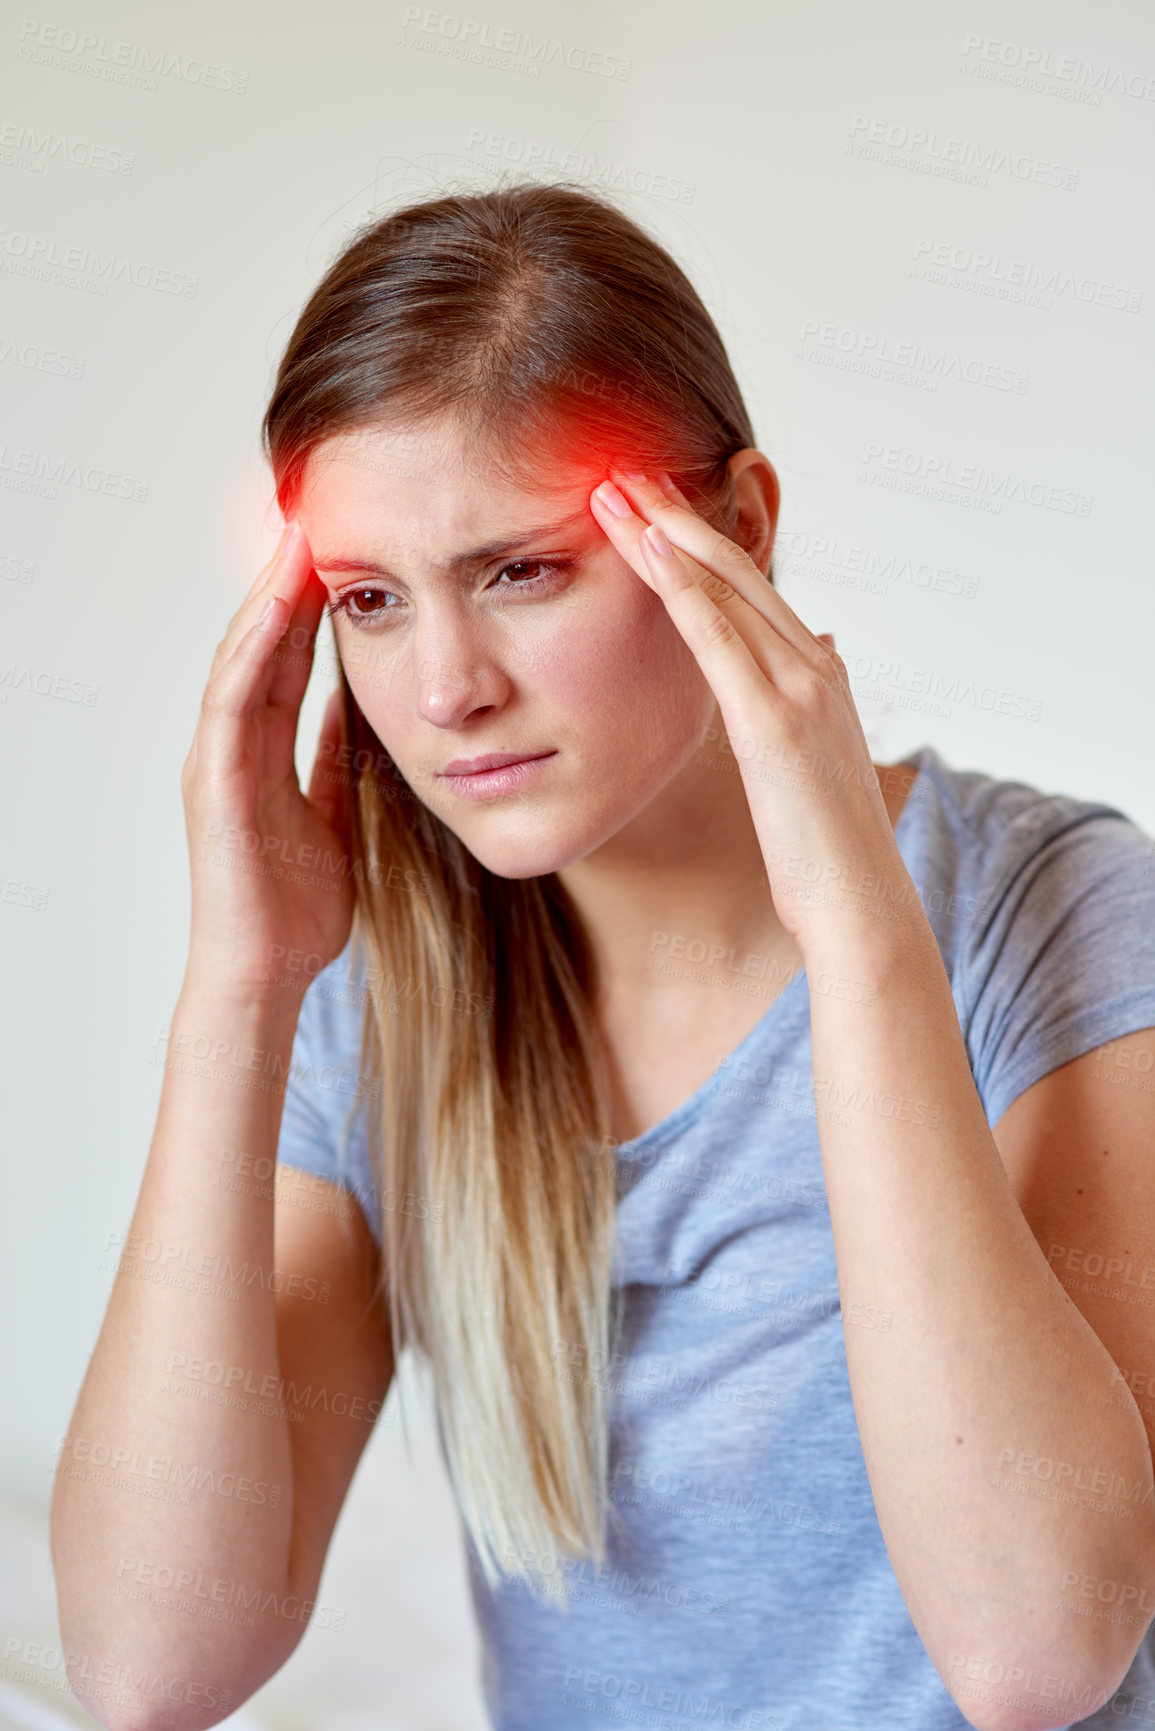 Buy stock photo Cropped shot of a young woman suffering from a headache highlighted in glowing red